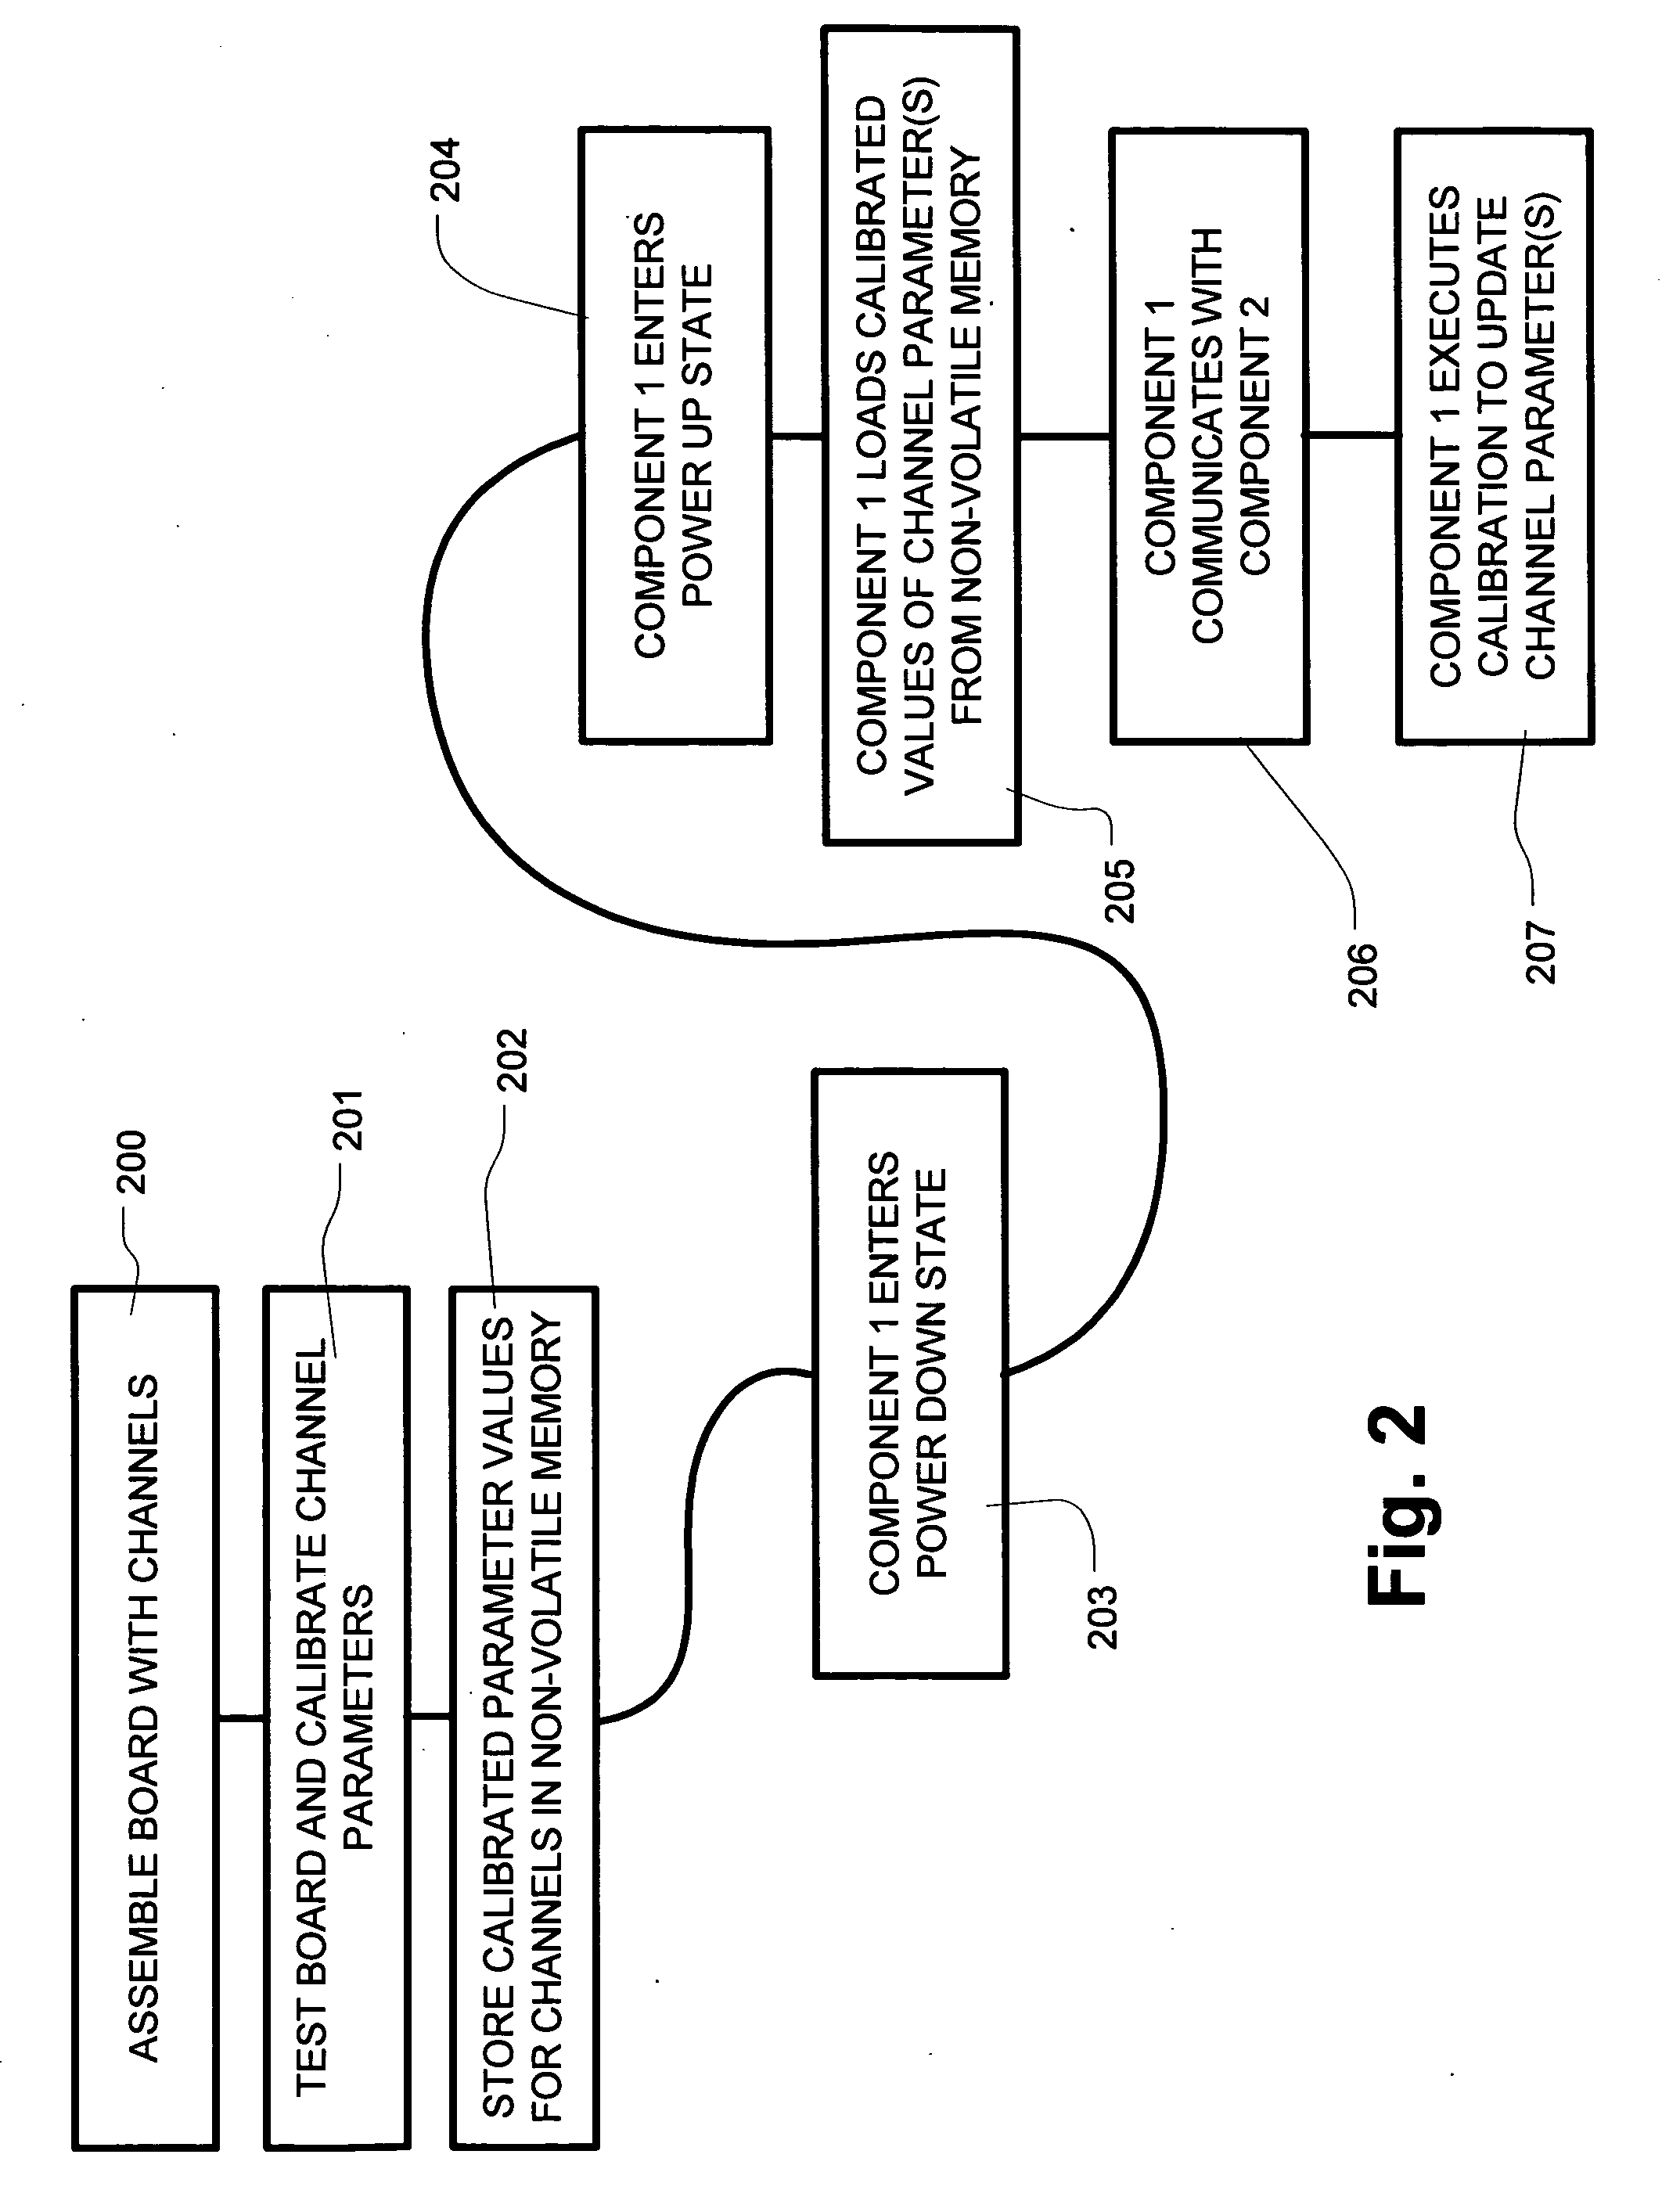 Communication channel calibration with nonvolatile parameter store for recovery